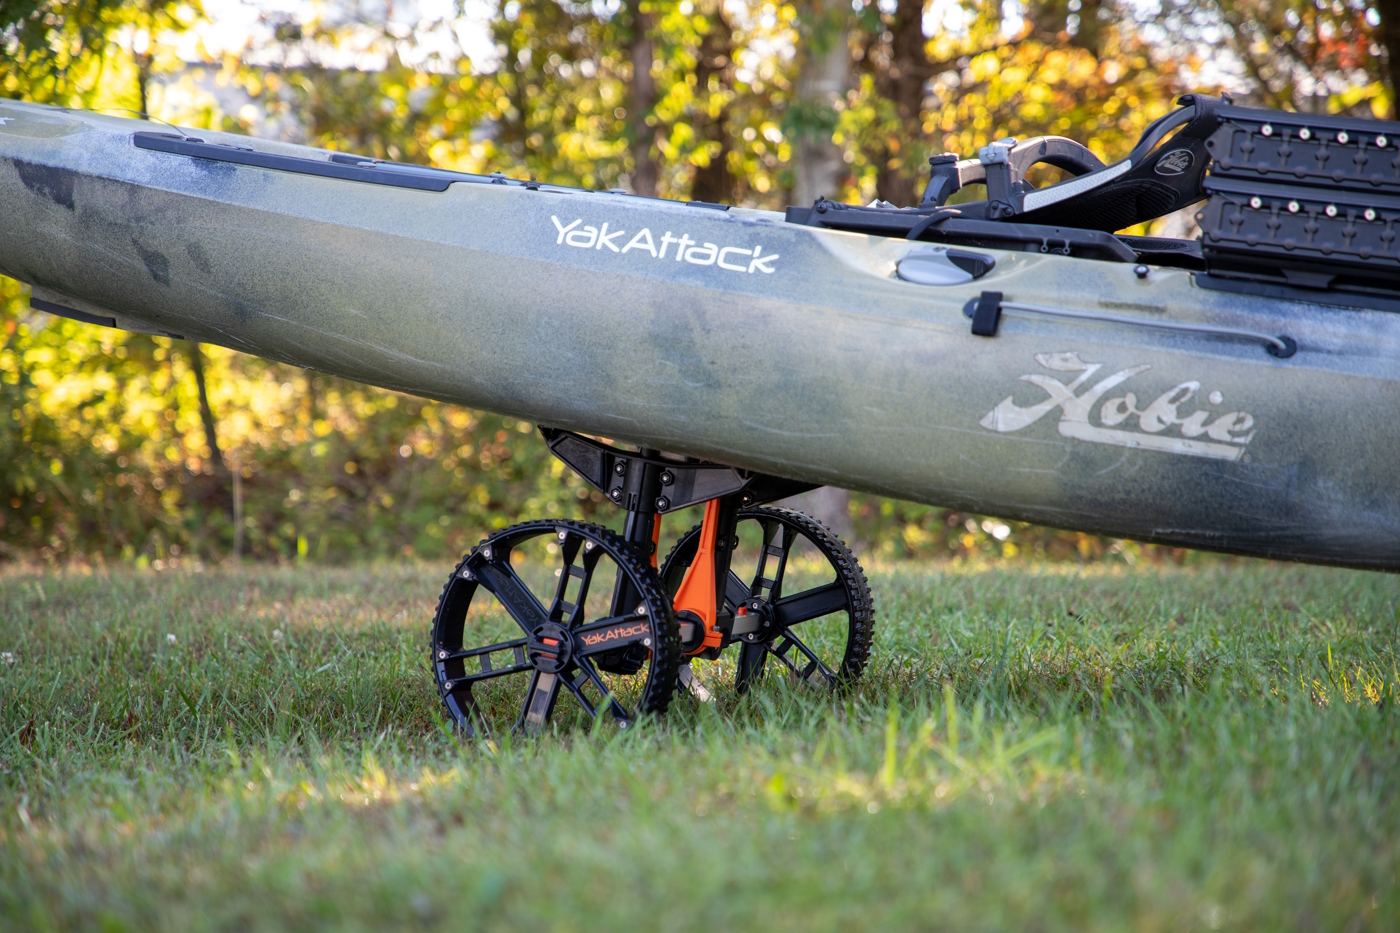 Hobie fishing kayak with scupper cart